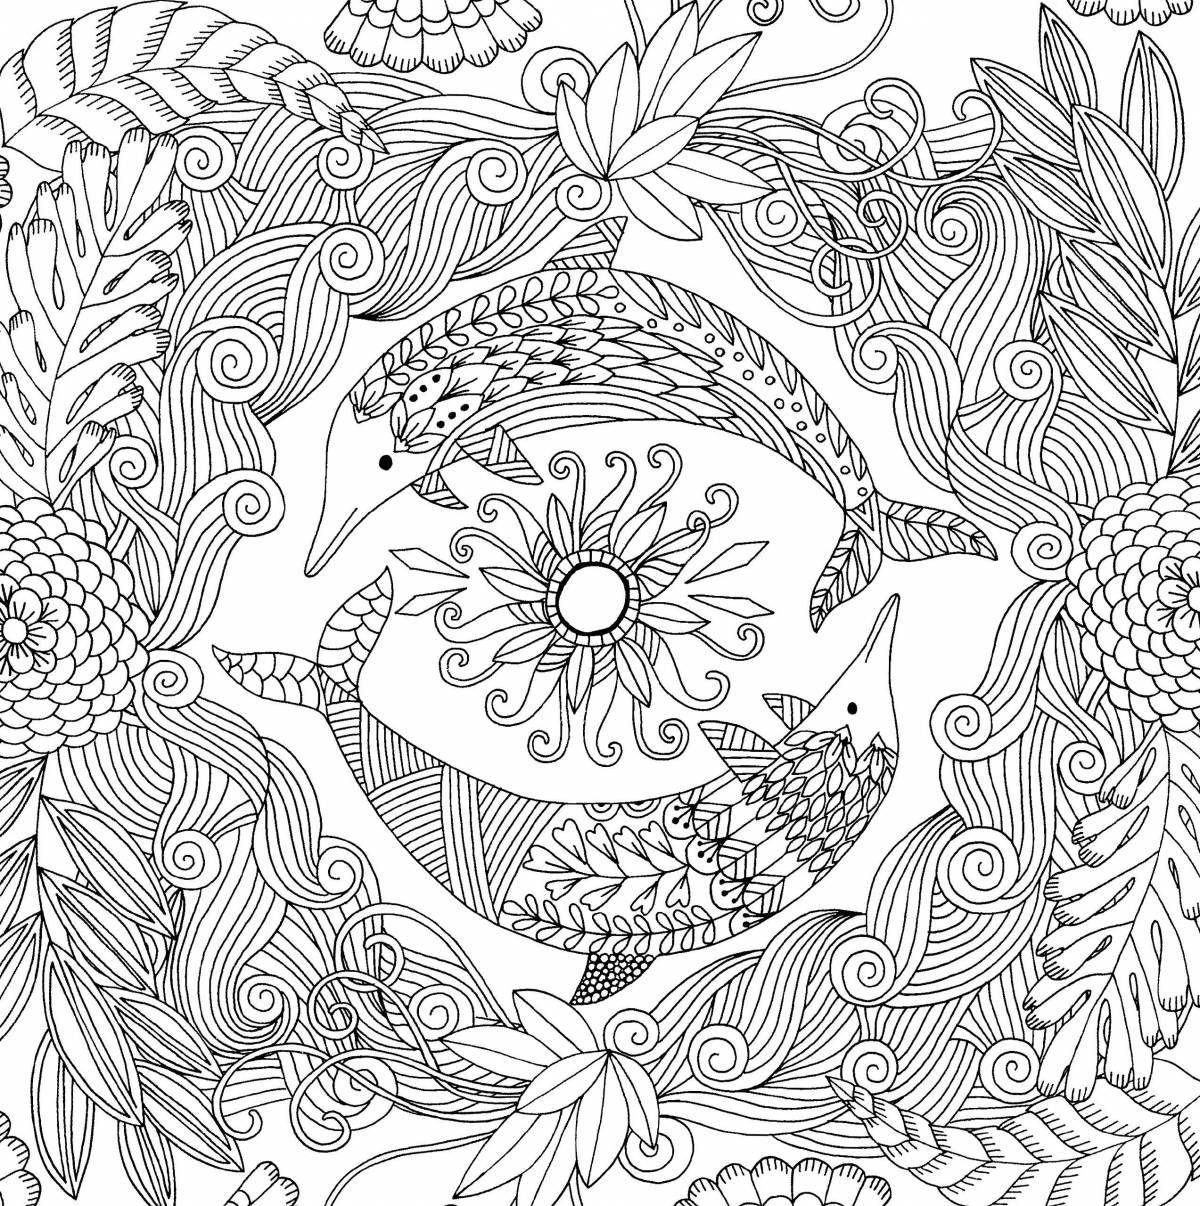 Stimulating art therapy coloring pages for adults